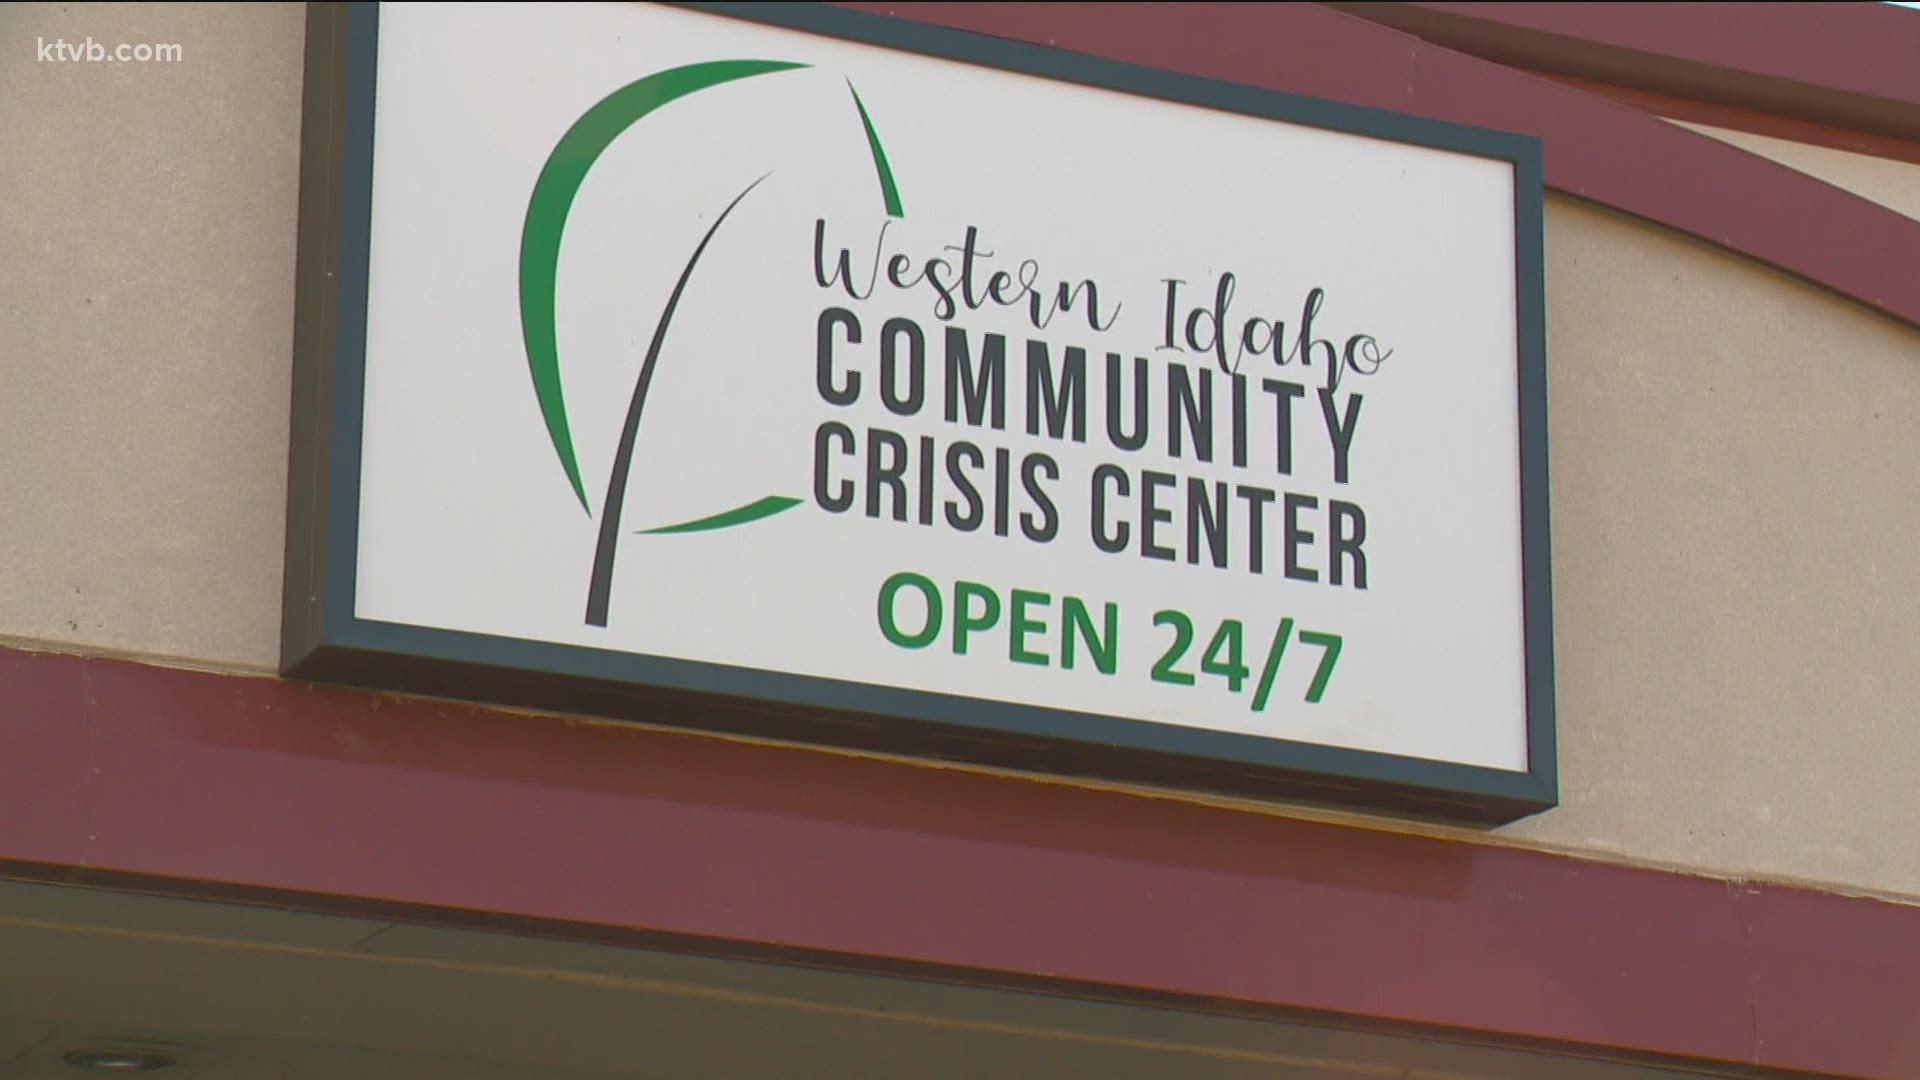 The Western Idaho Community Crisis Center serves several counties and is free.